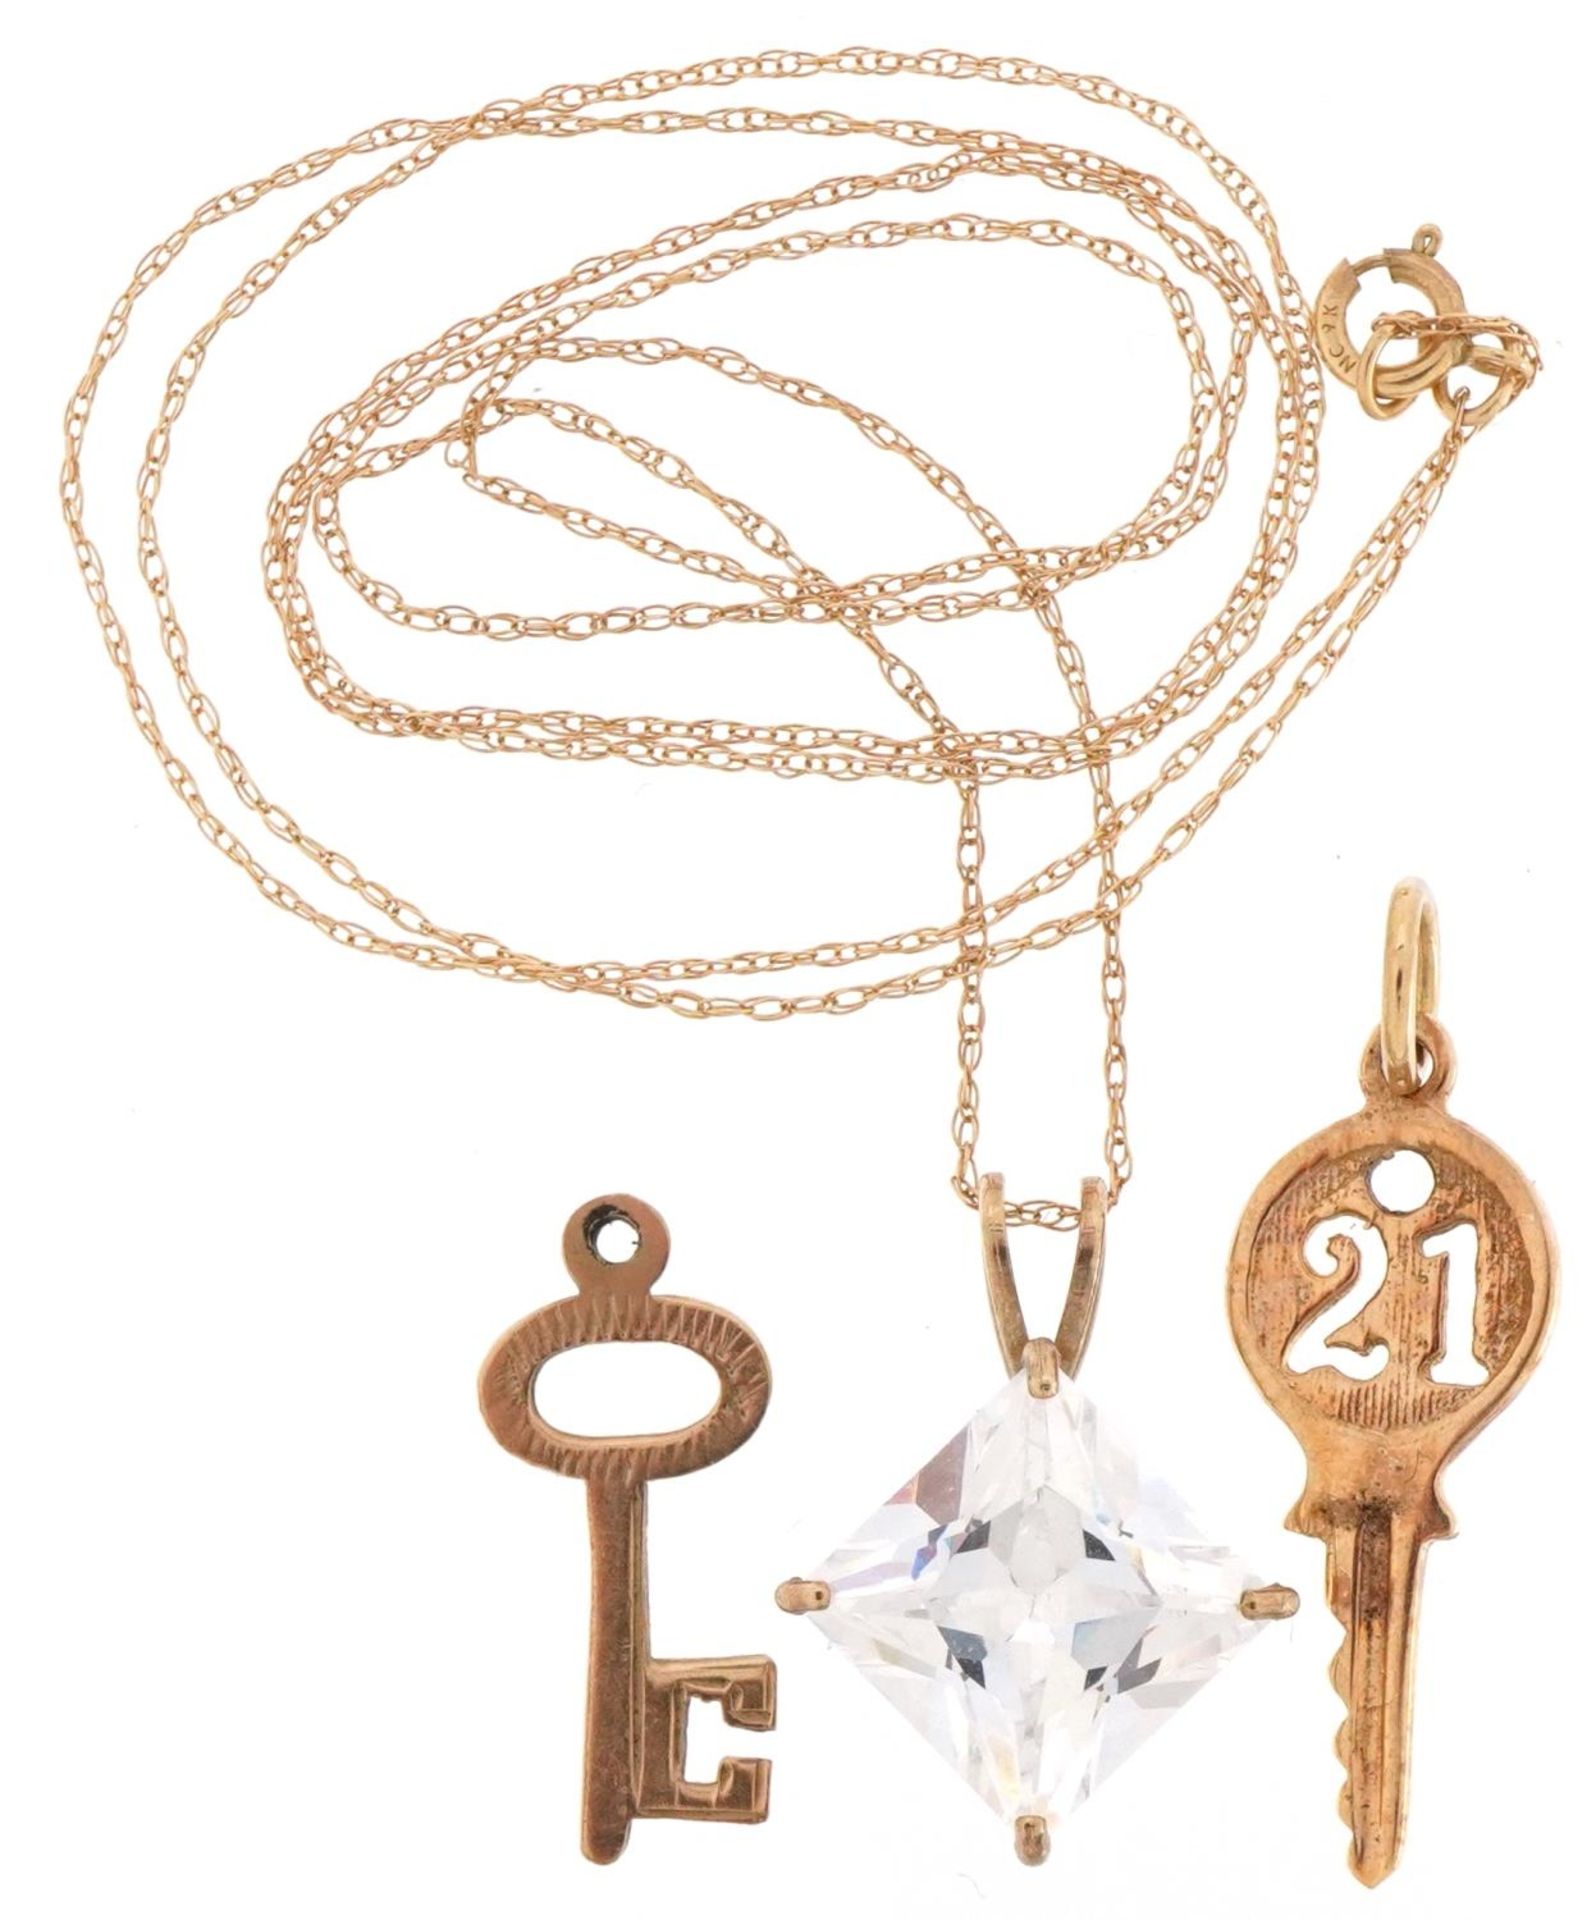 9ct gold jewellery comprising cubic zirconia pendant on necklace and two charms in the form of keys, - Image 2 of 5